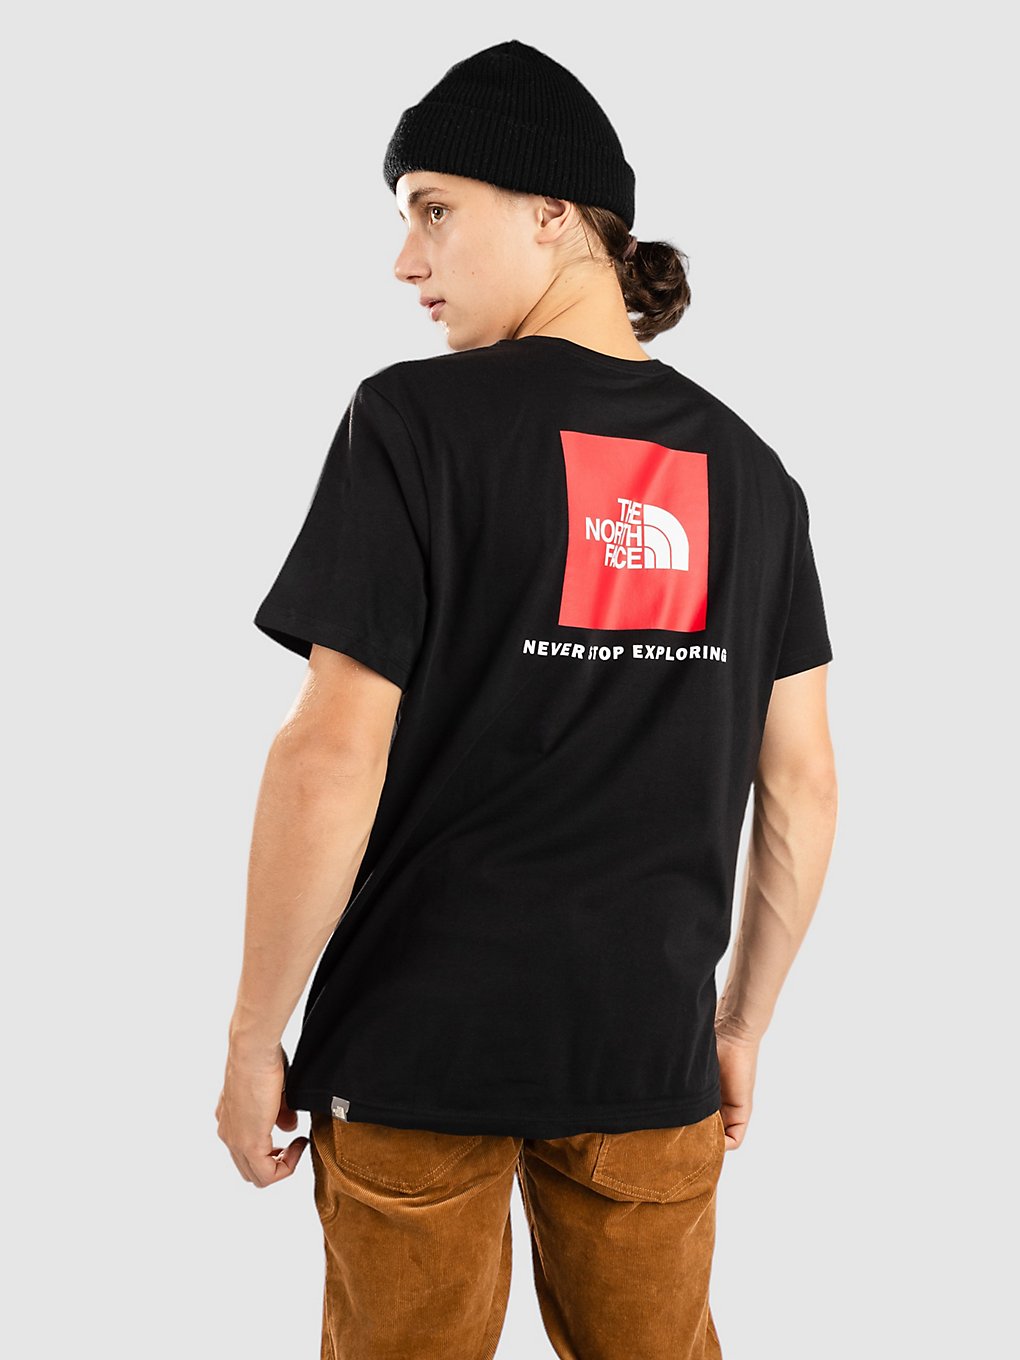 THE NORTH FACE Red Box T-Shirt tnf black kaufen